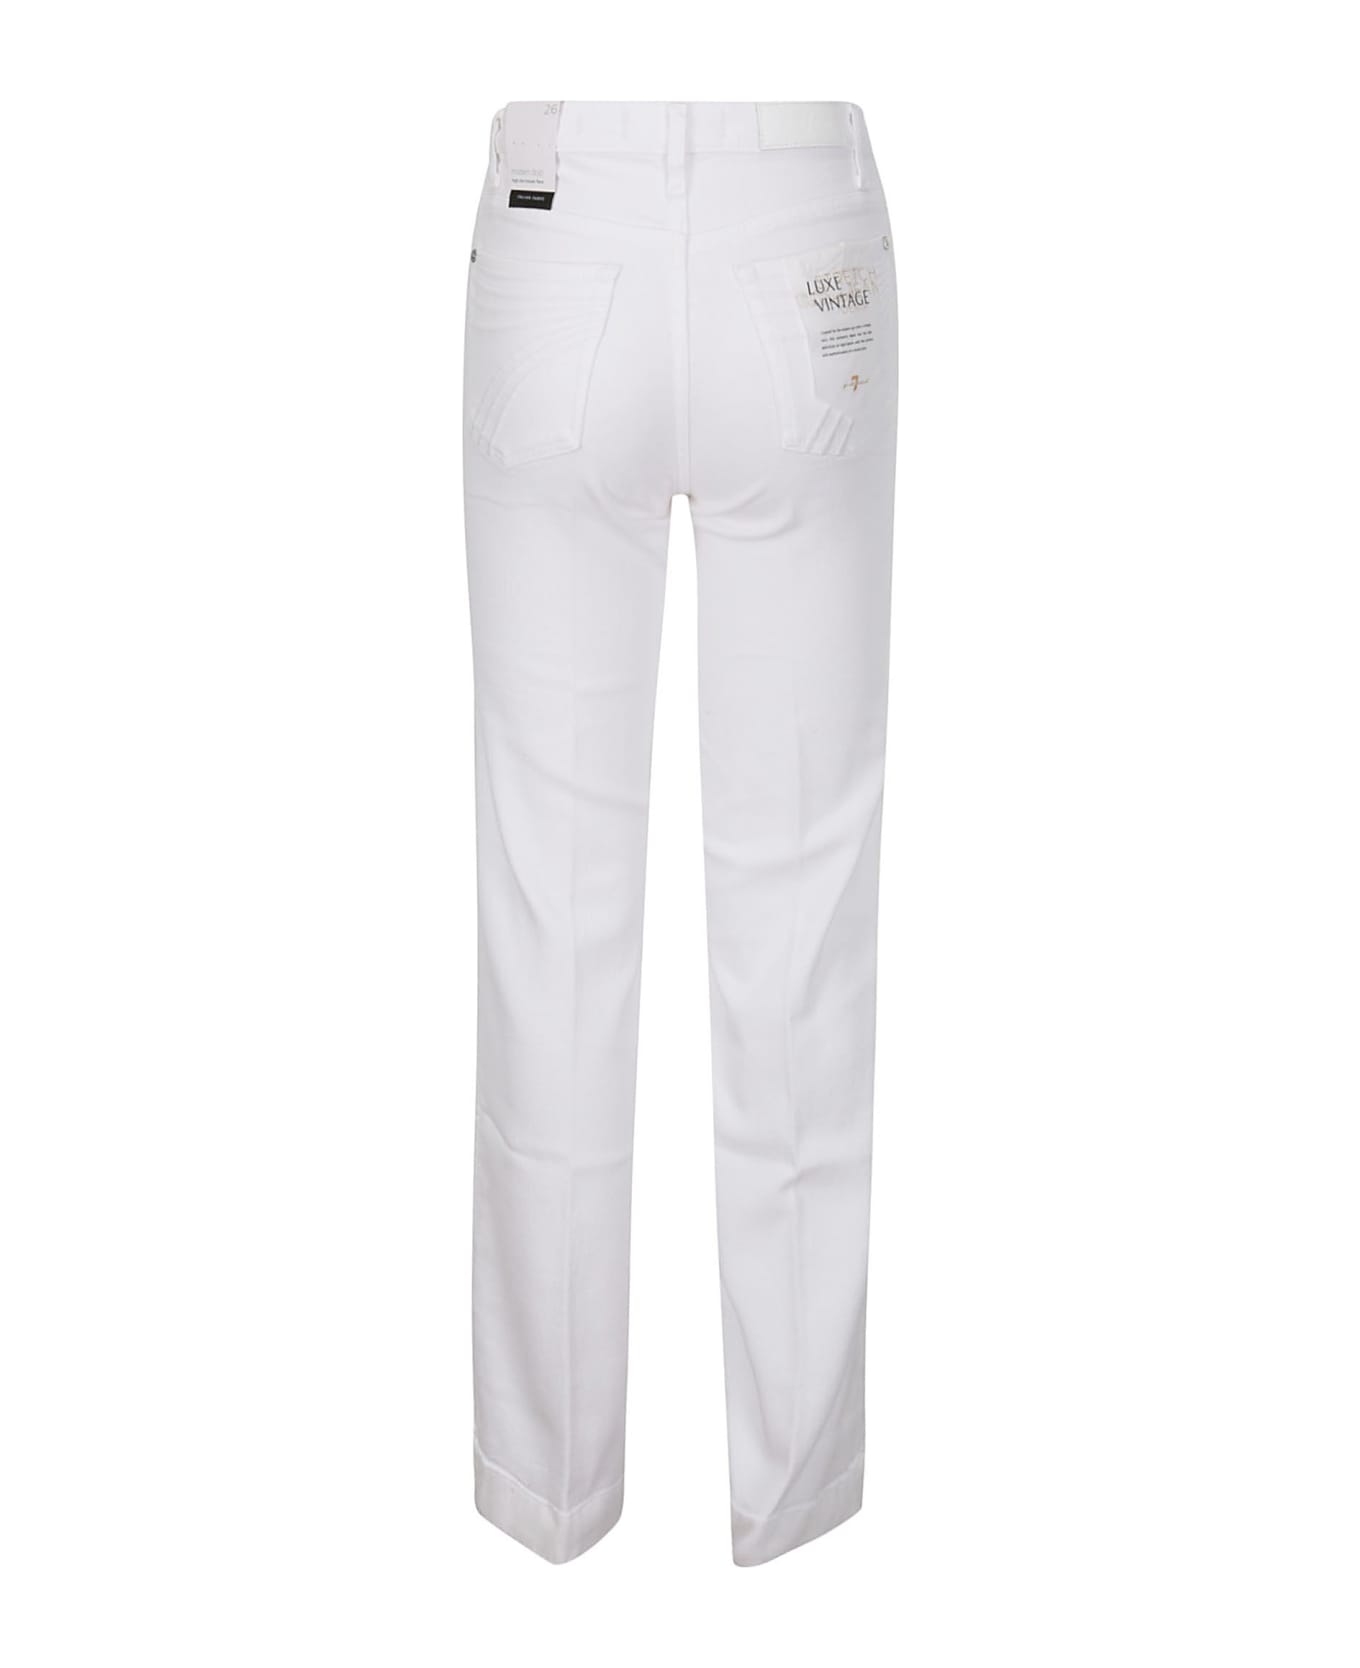 7 For All Mankind Modern Dojo Luxe Vintage Soleil - WHITE ボトムス